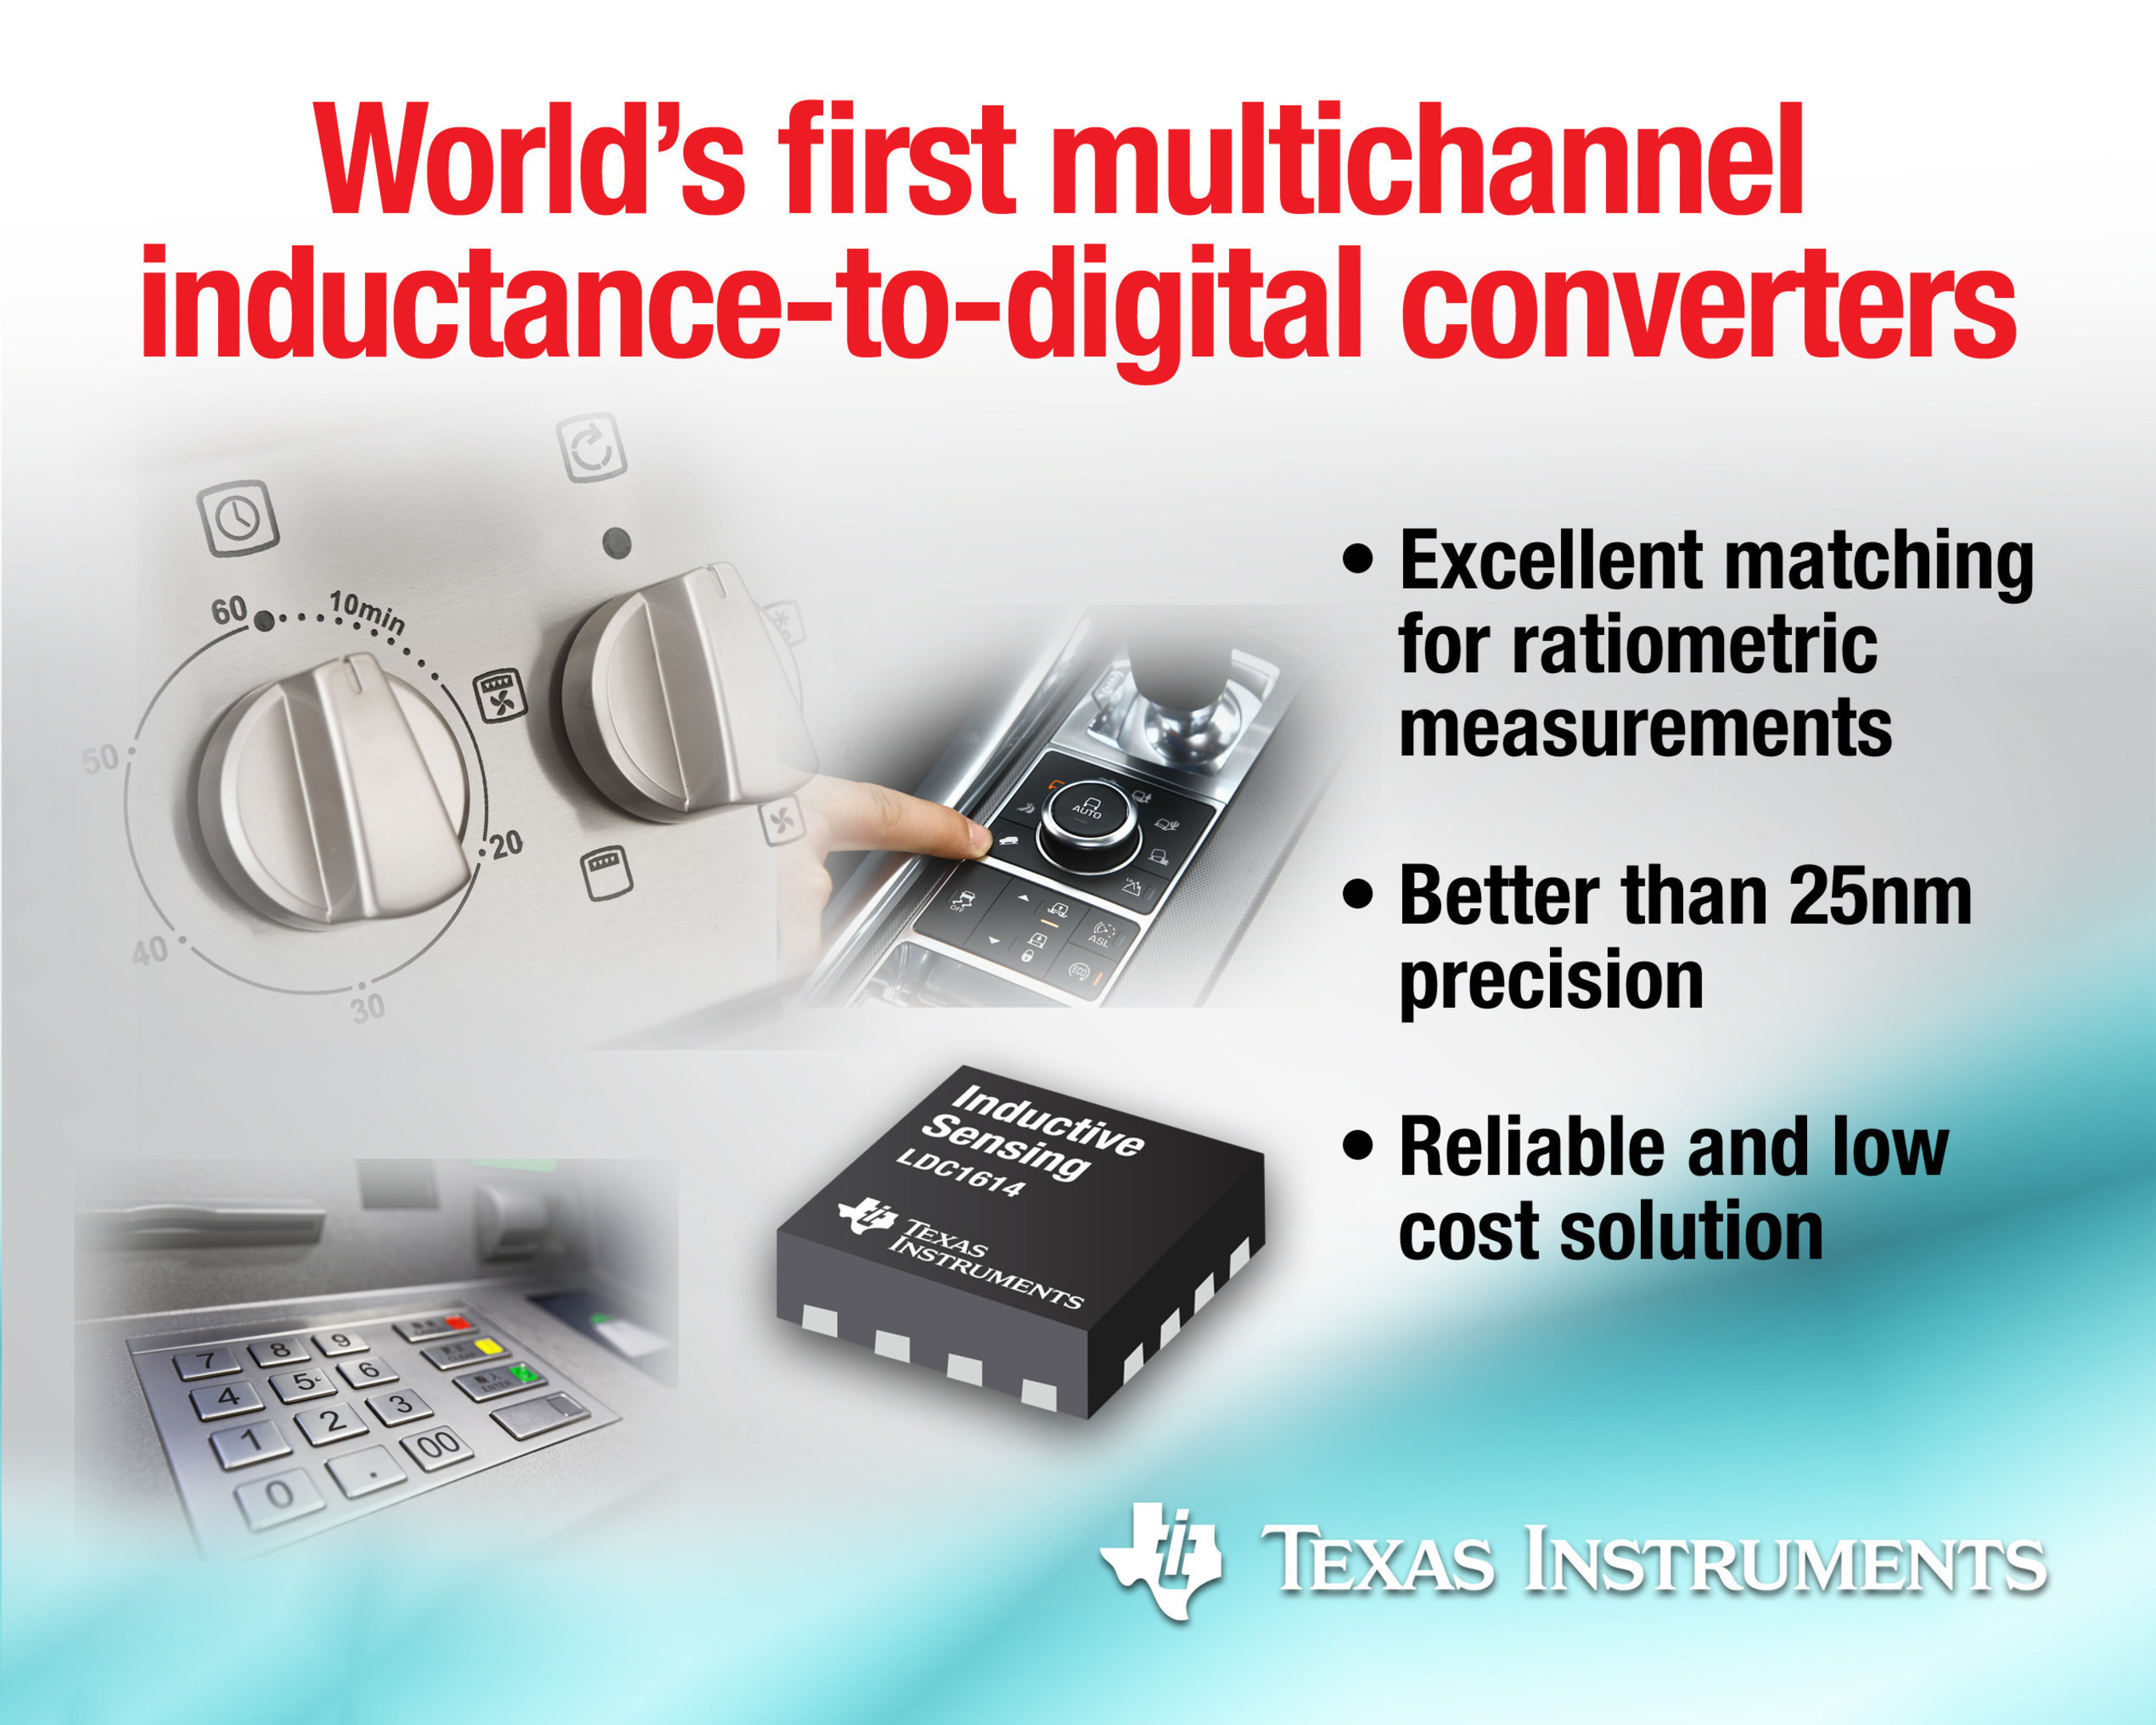 TI introduces world's first multichannel inductance-to-digital converters with four new devices in the LDC1614 family